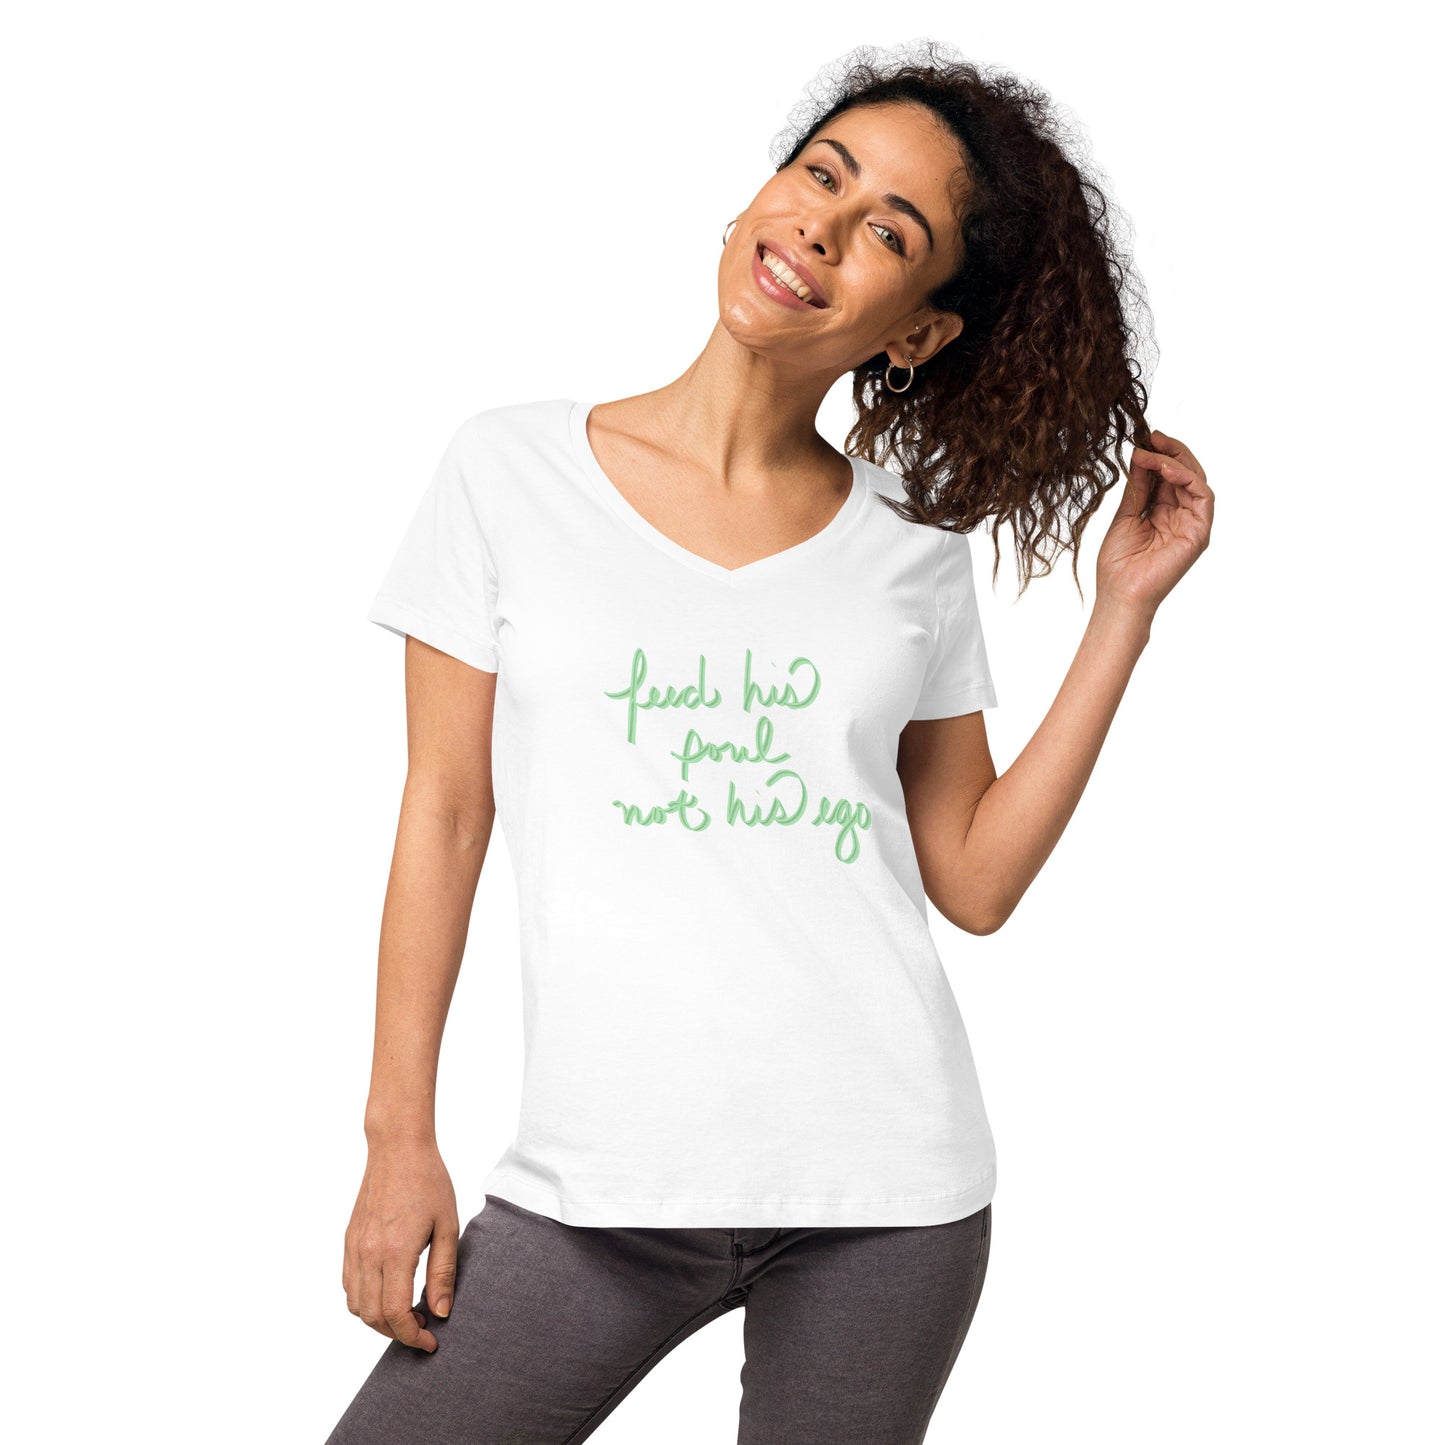 "Feed His Soul" Women’s Fitted V-neck T-shirt